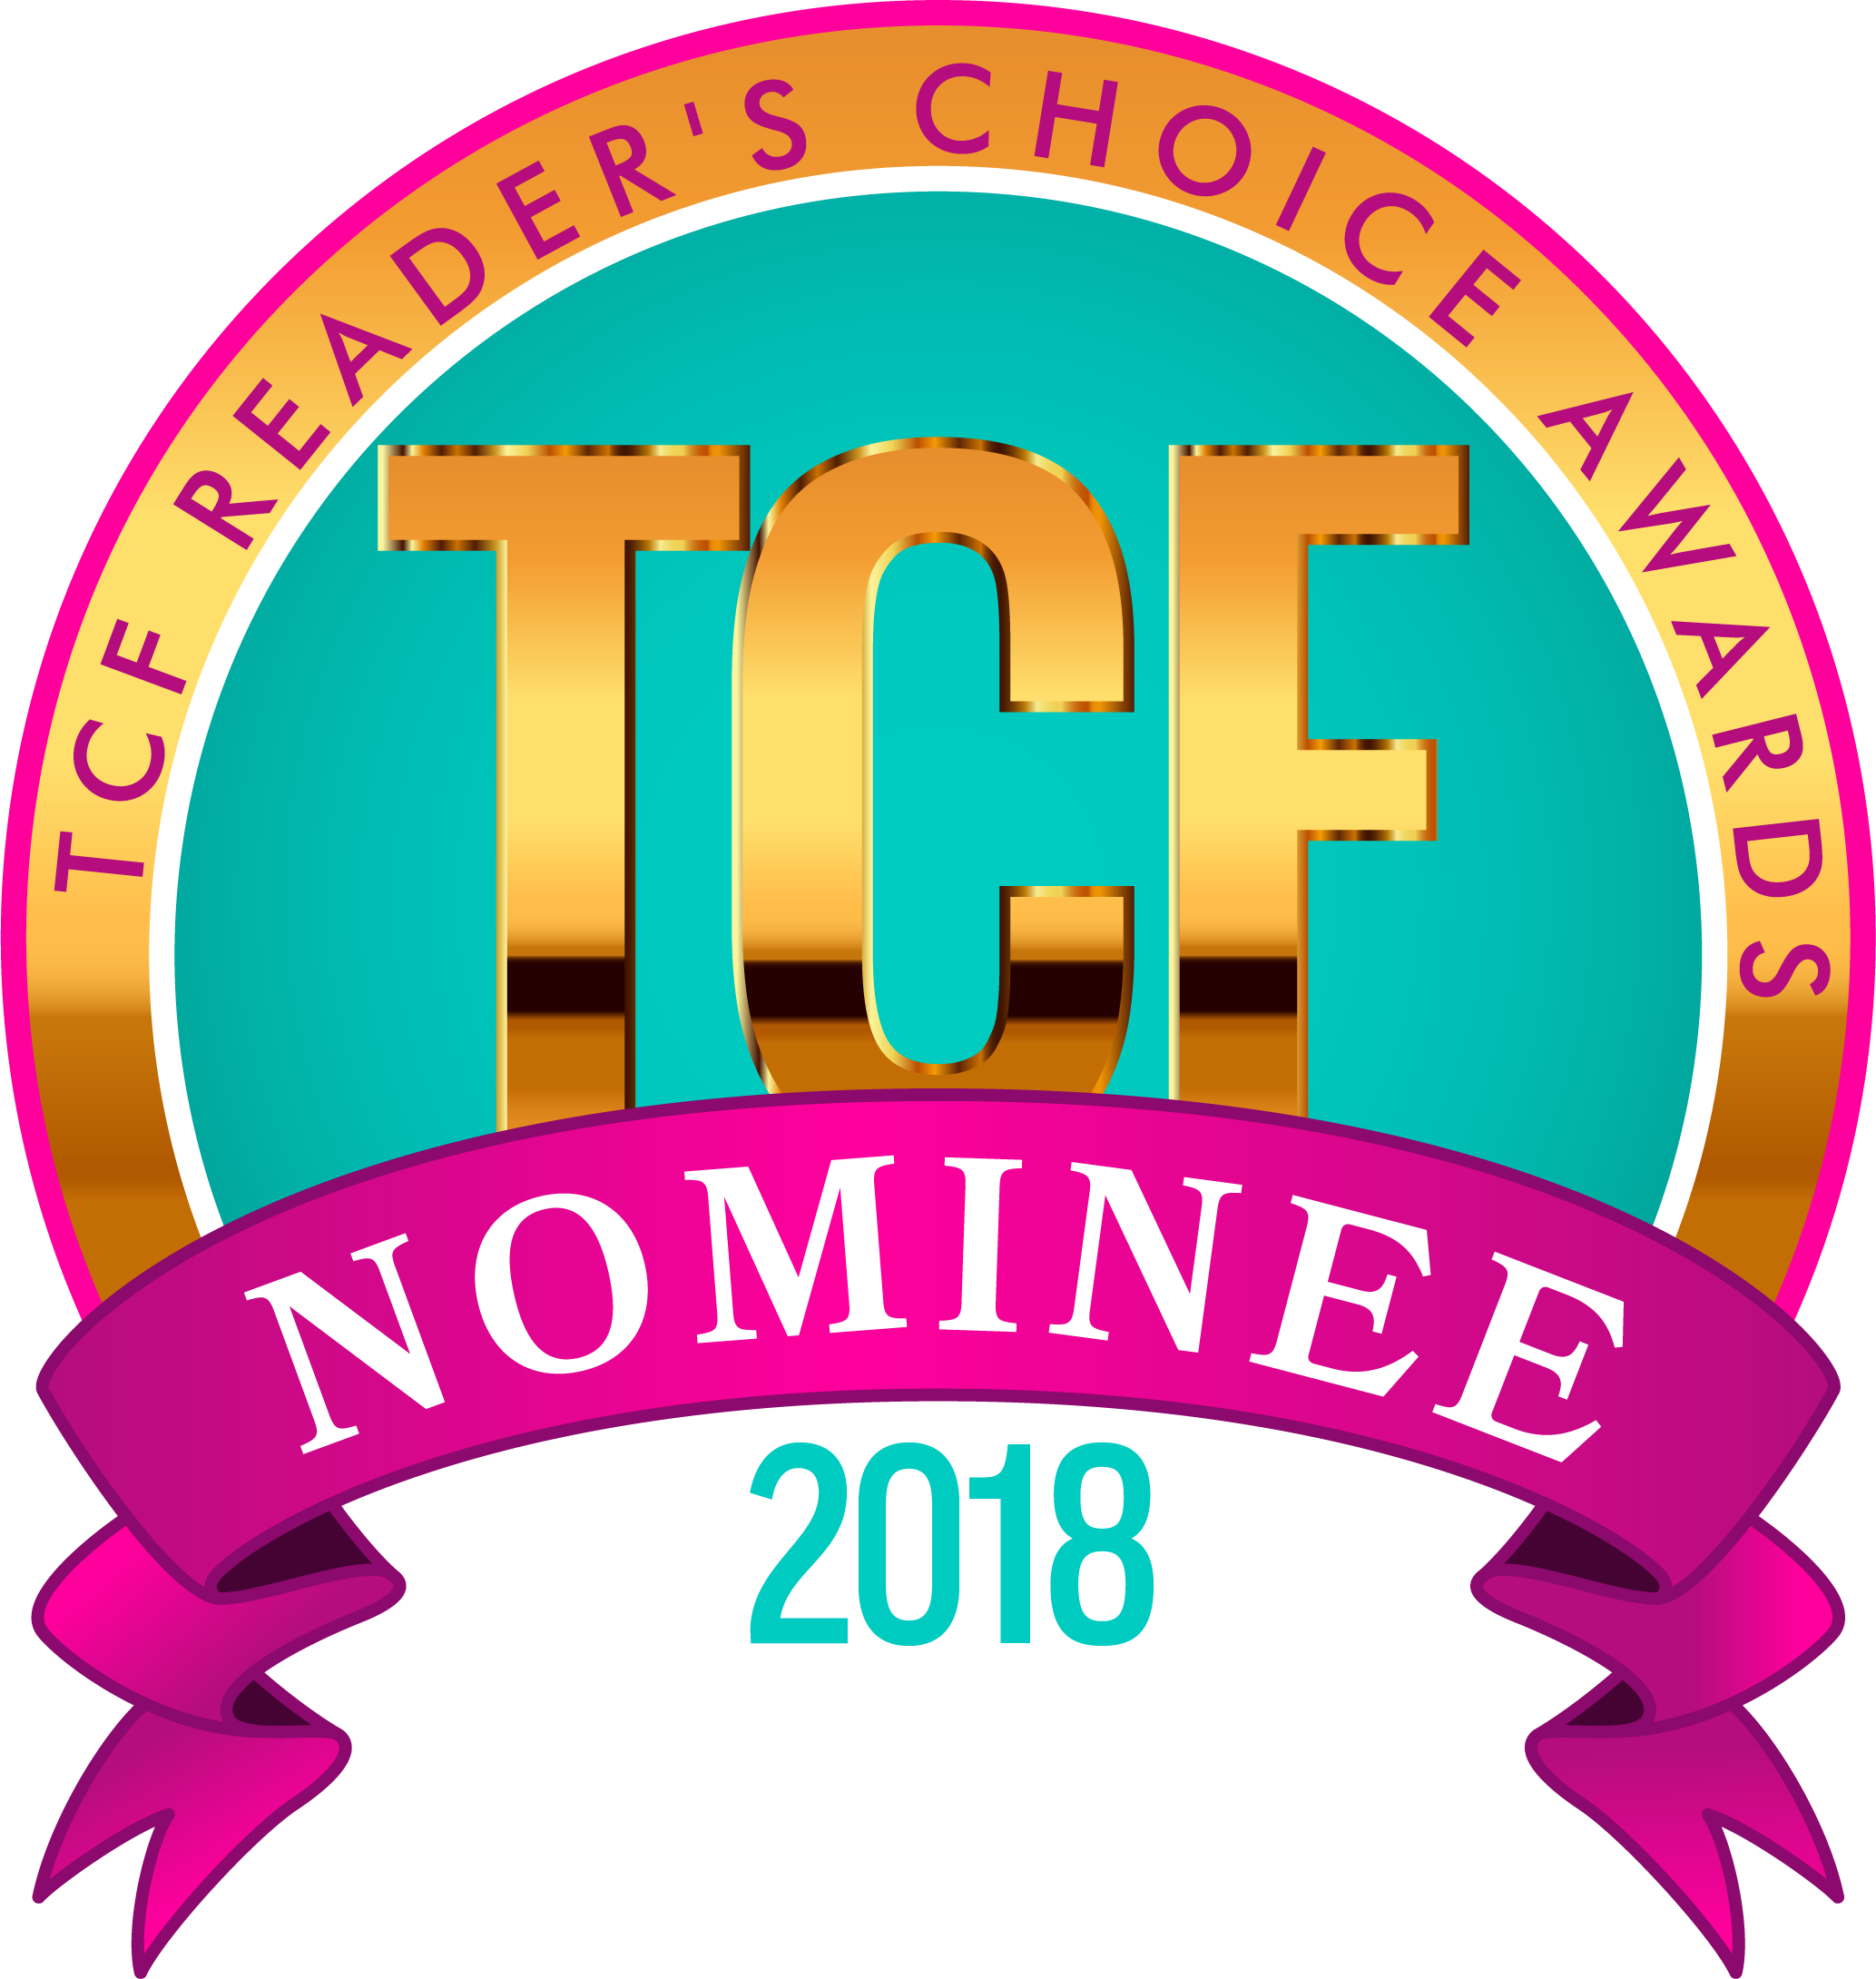 It's time to vote for your favorite plus size brands, boutiques and retailers in the 2018 TCFReader's Choice Awards! Vote now and let your voice be heard!